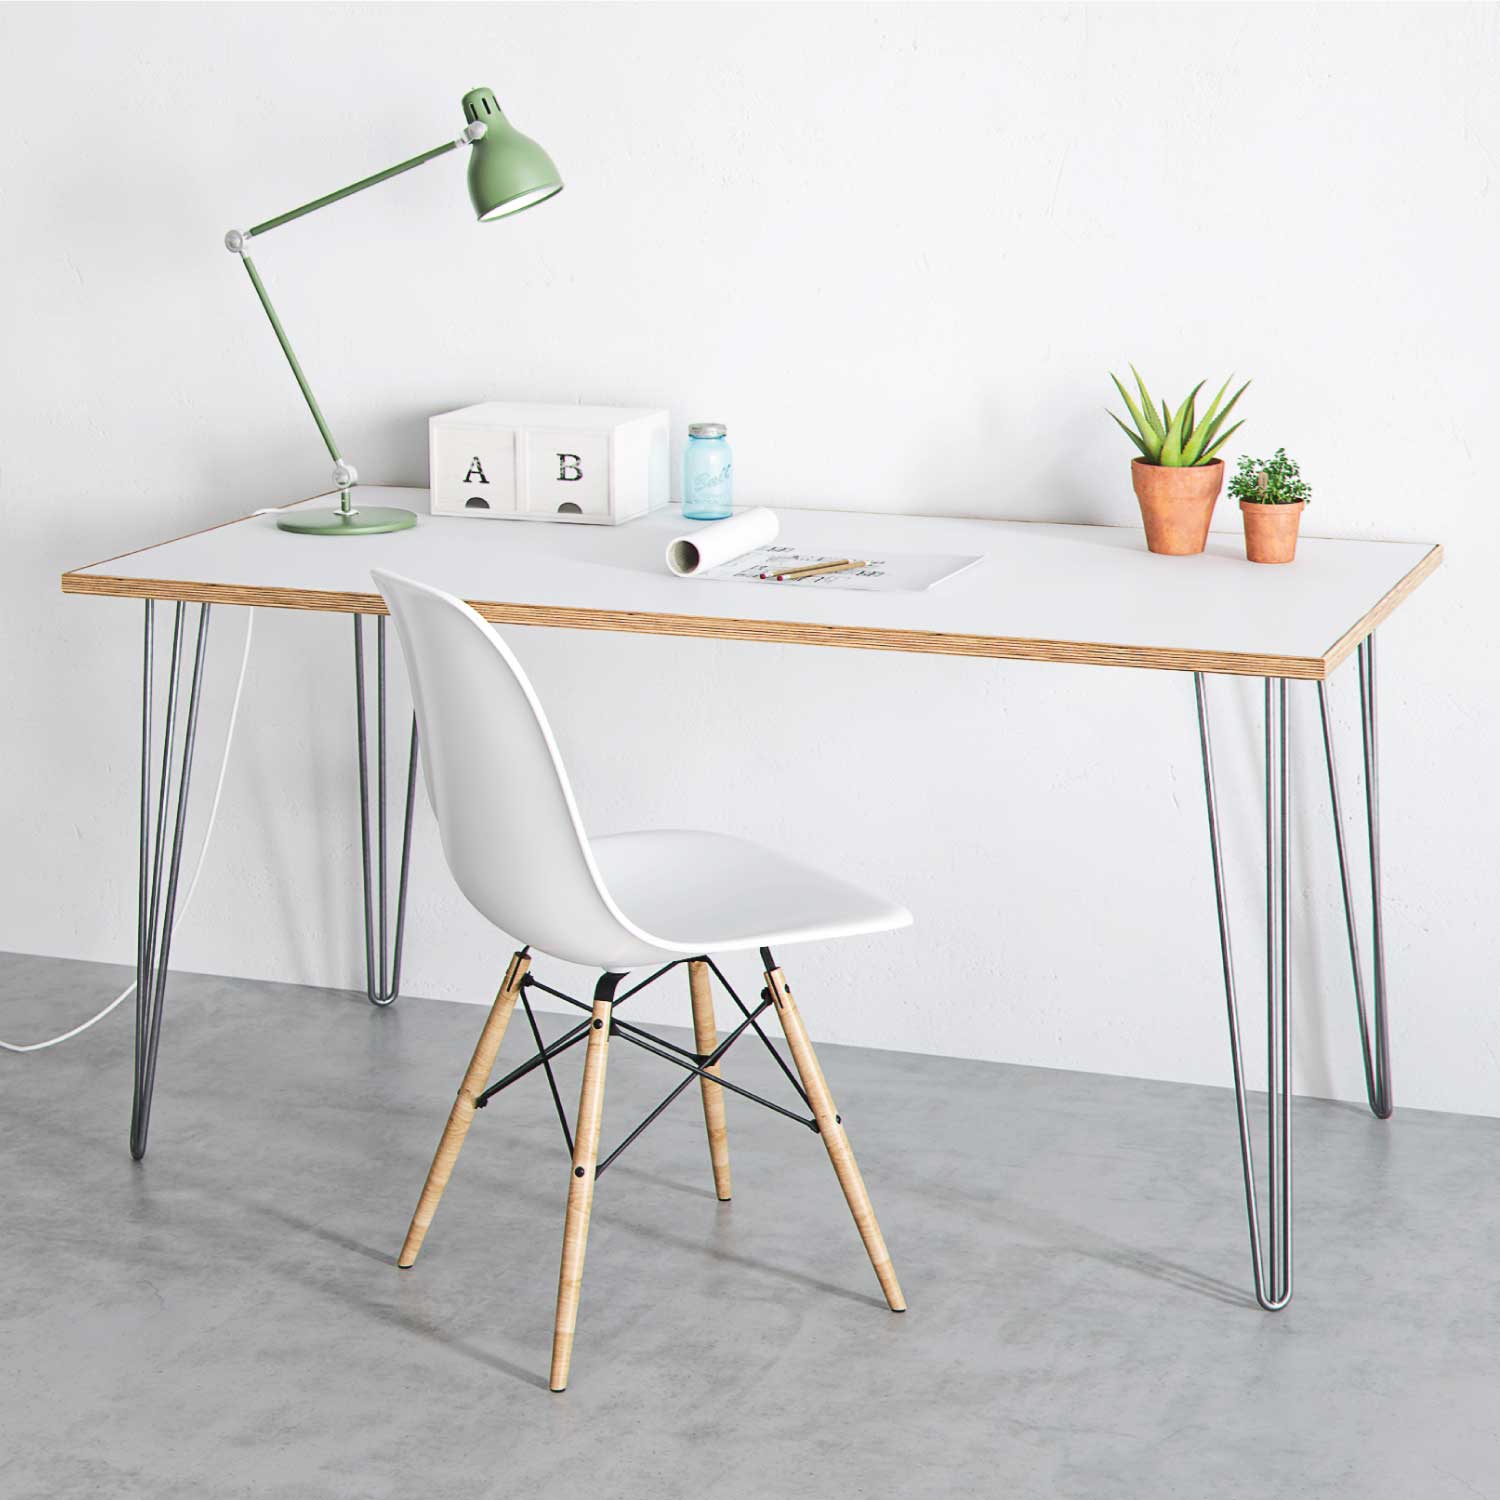 7 Tips for Buying Hairpin Table Legs - The Hairpin Leg Co.